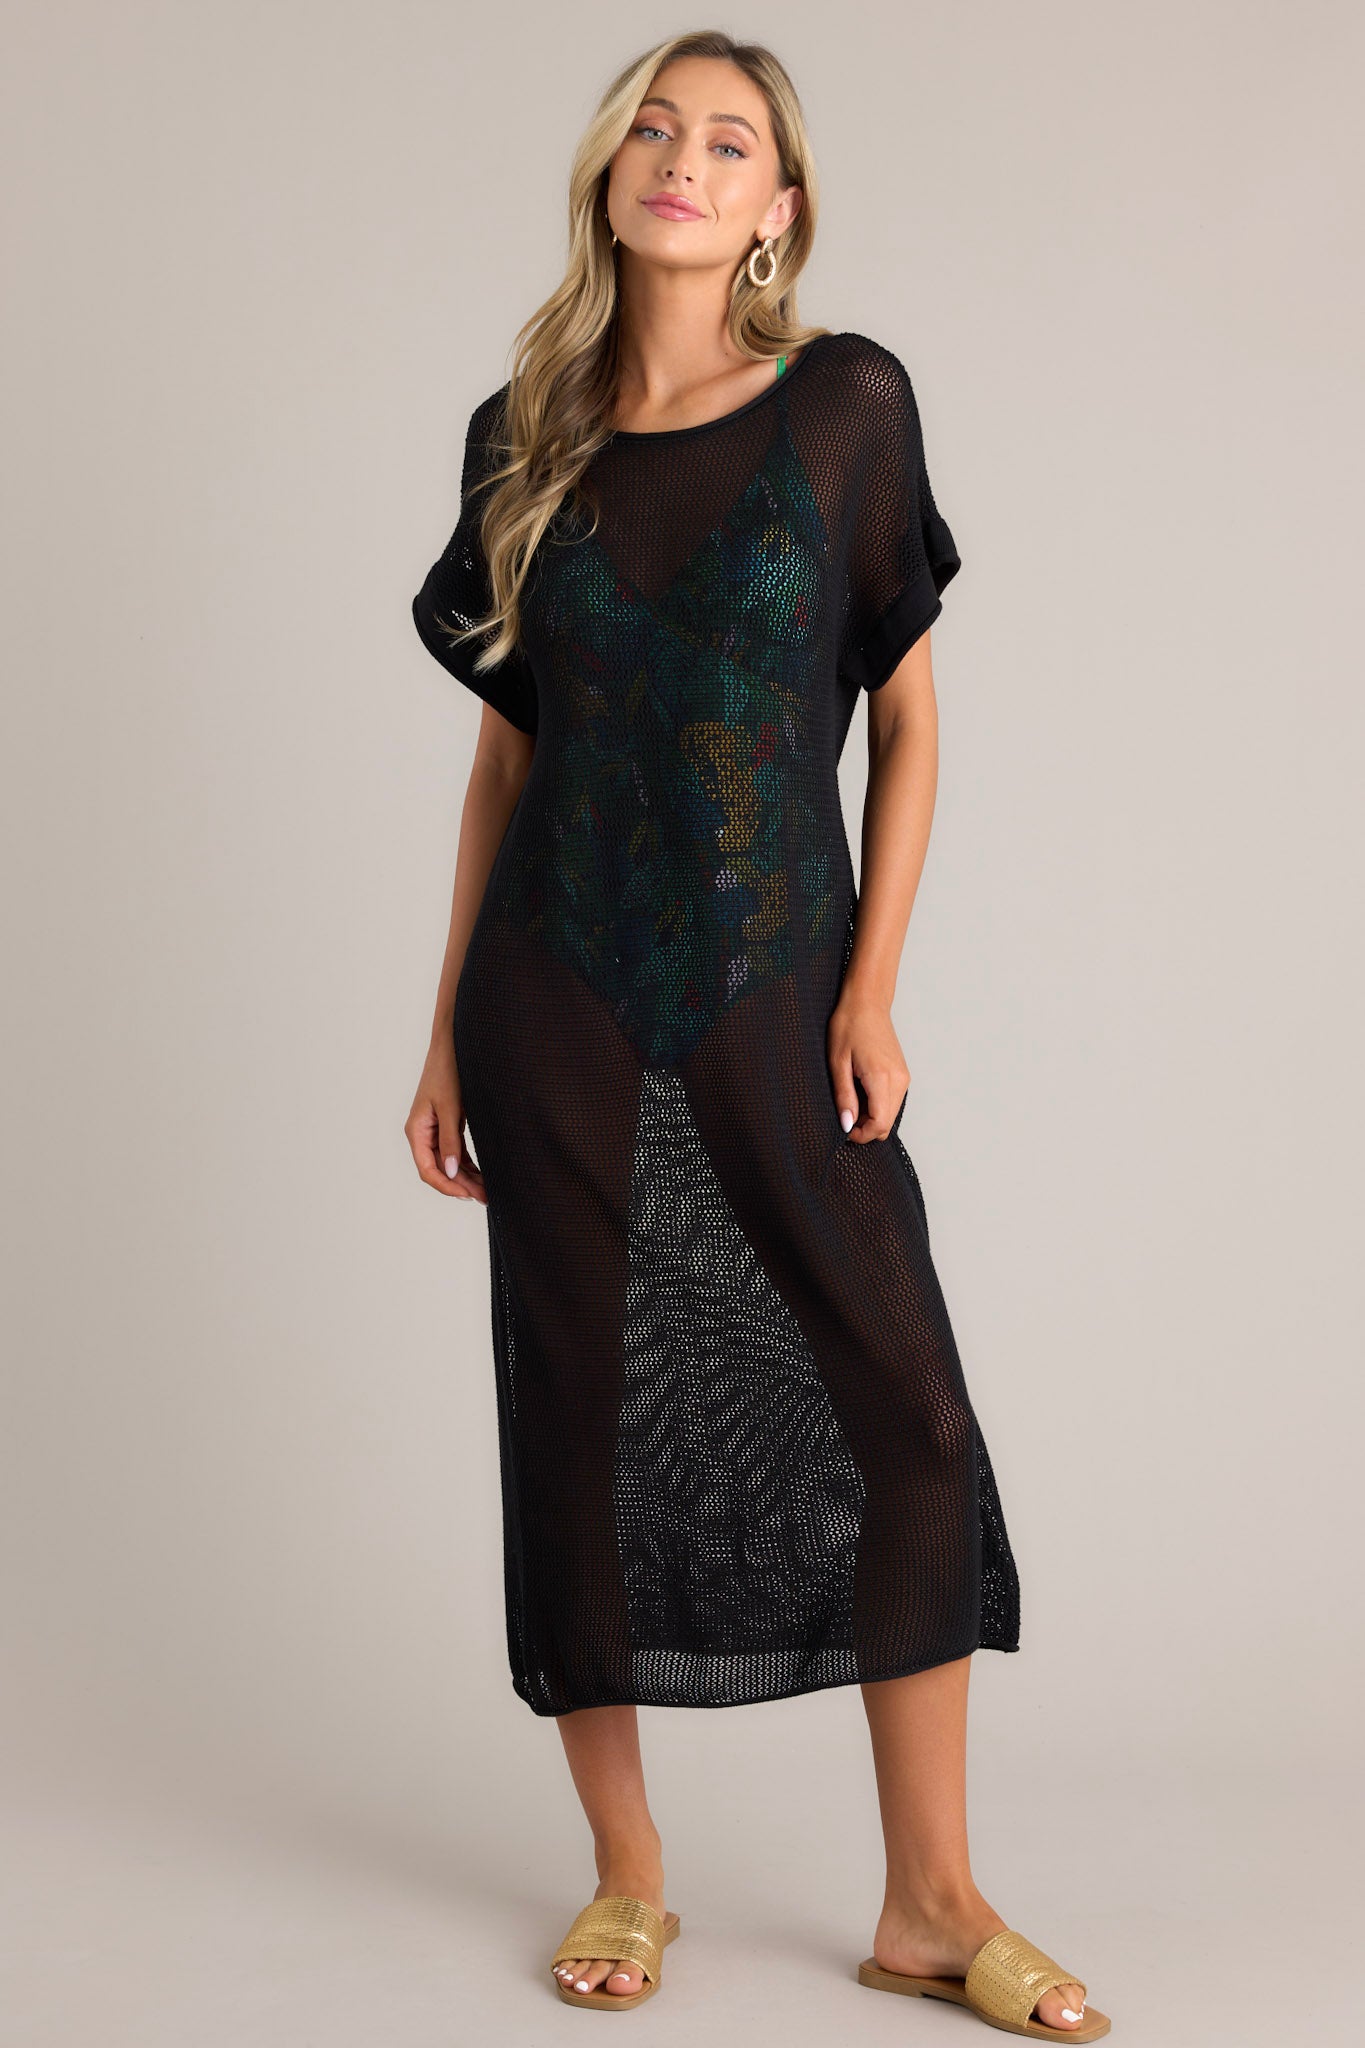 Full body  view of this black cover-up dress that features a wide rounded neckline, open back feature, an open-knit design, and cuffed short sleeves.